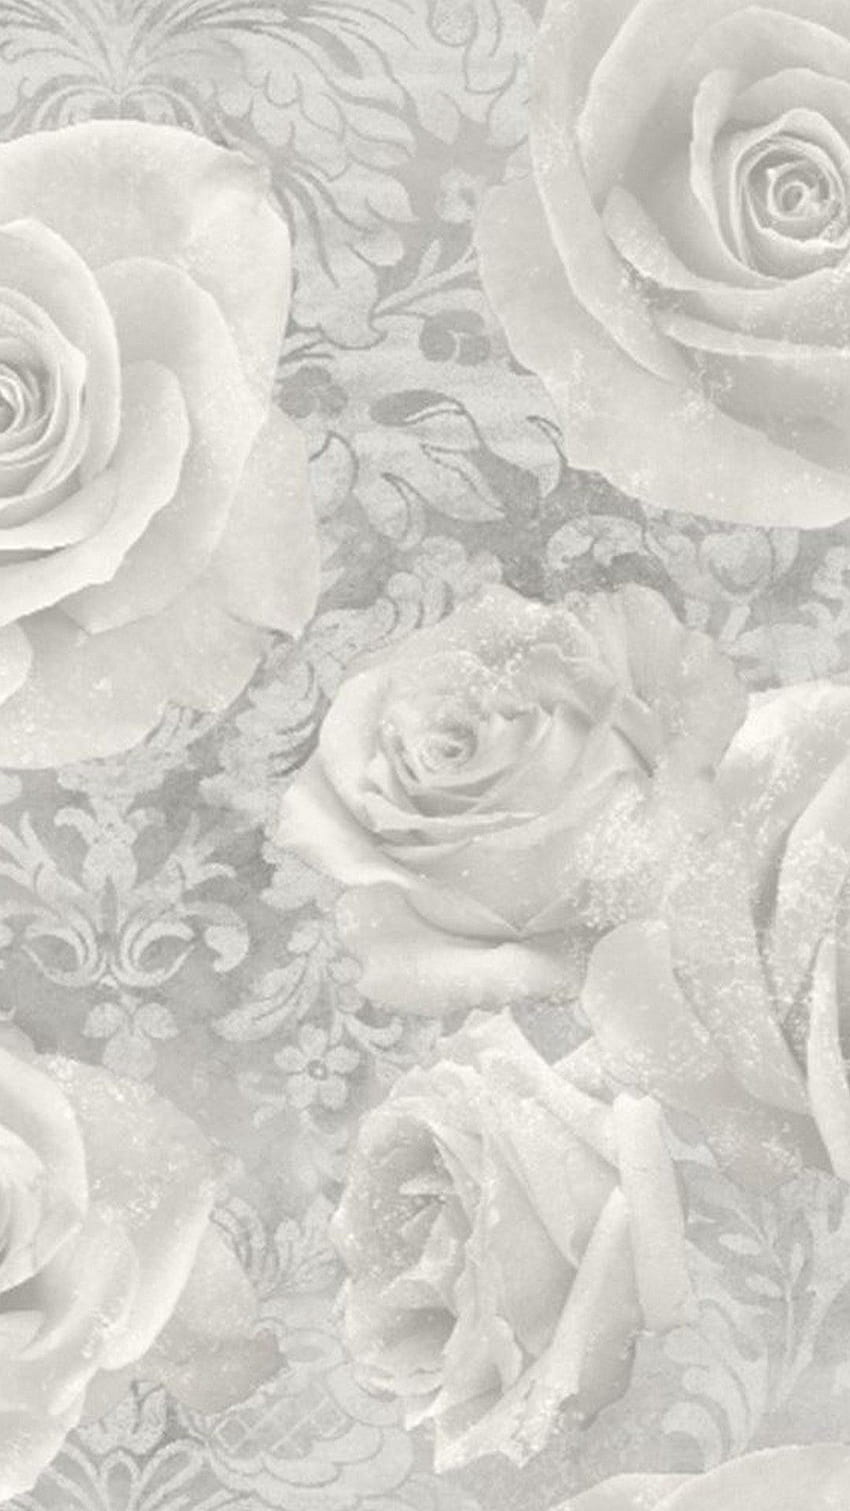 Grey iPhone - Best iPhone . Flower , Vintage flowers , Flower background iphone, Gray and White iPhone HD phone wallpaper